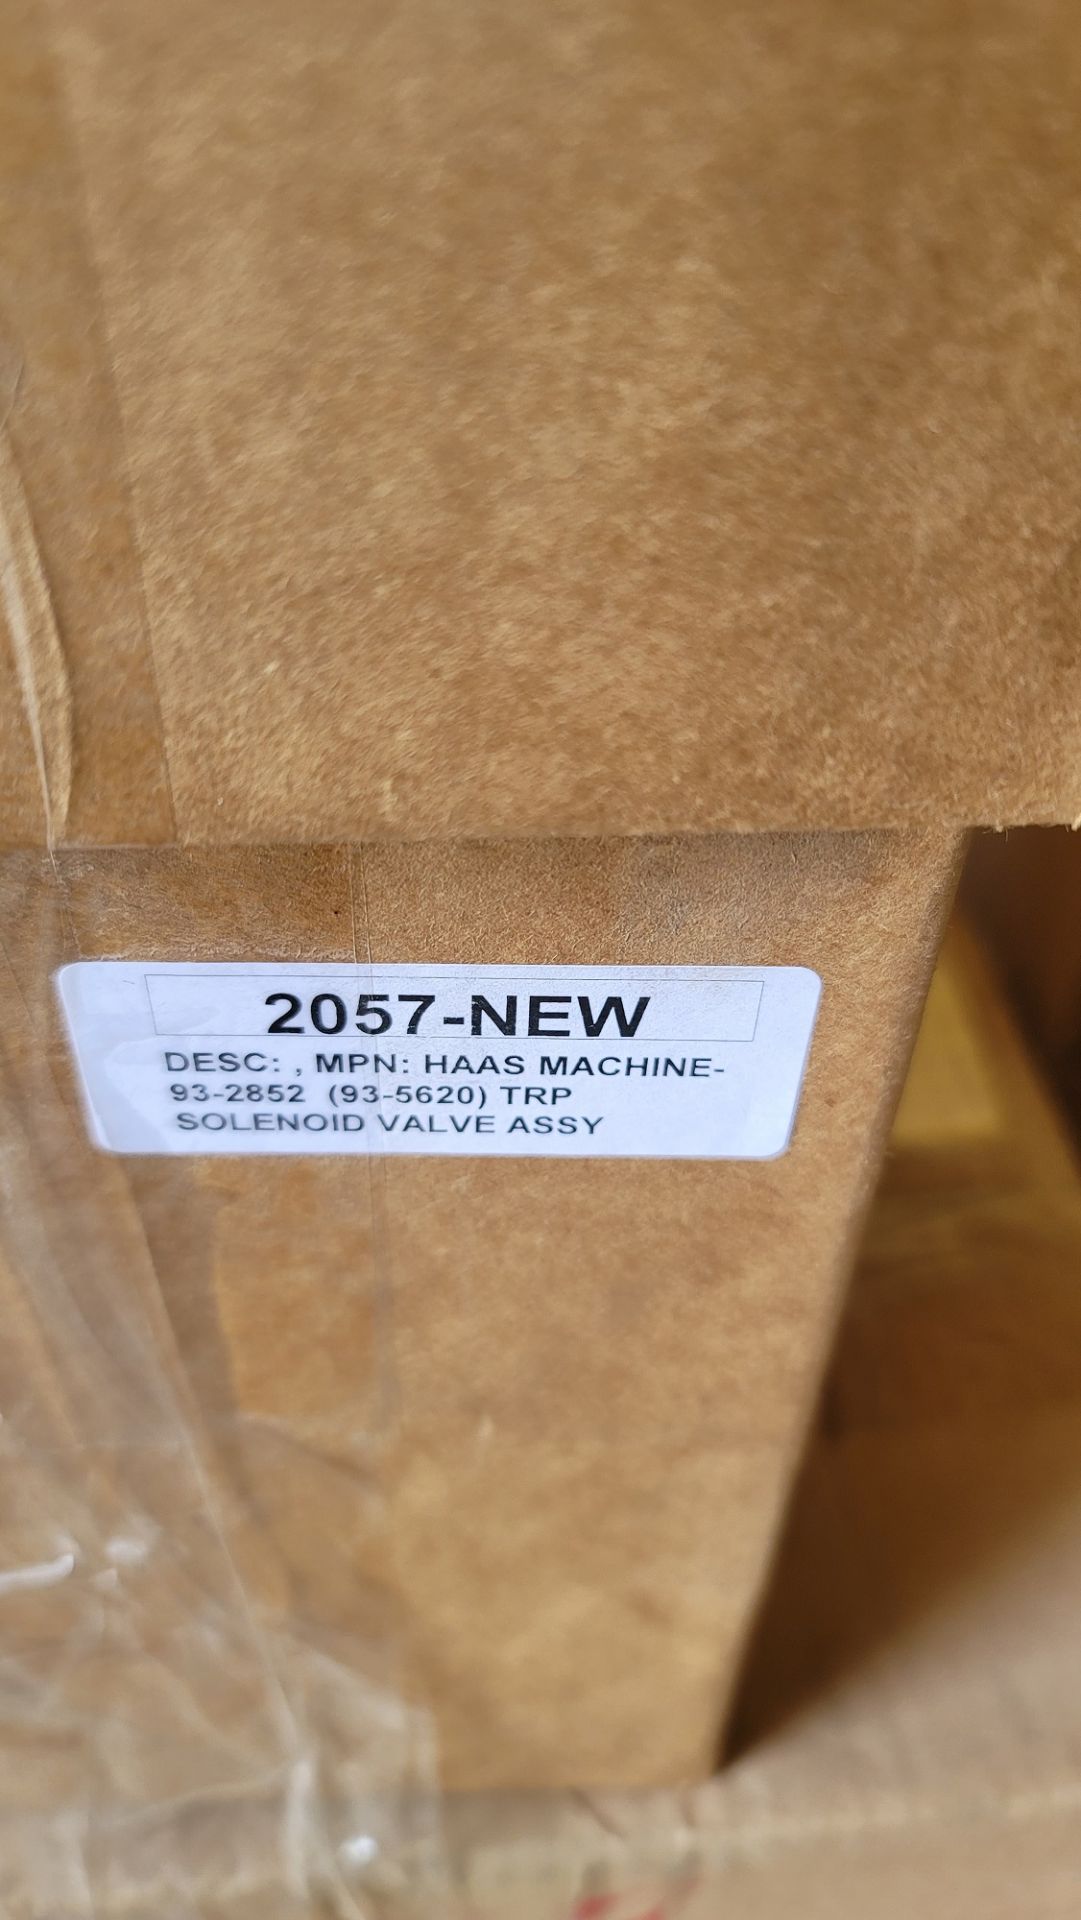 LOT - (8) BOXES OF HAAS MACHINE PARTS, NEW, SEE PHOTOS - Image 7 of 8